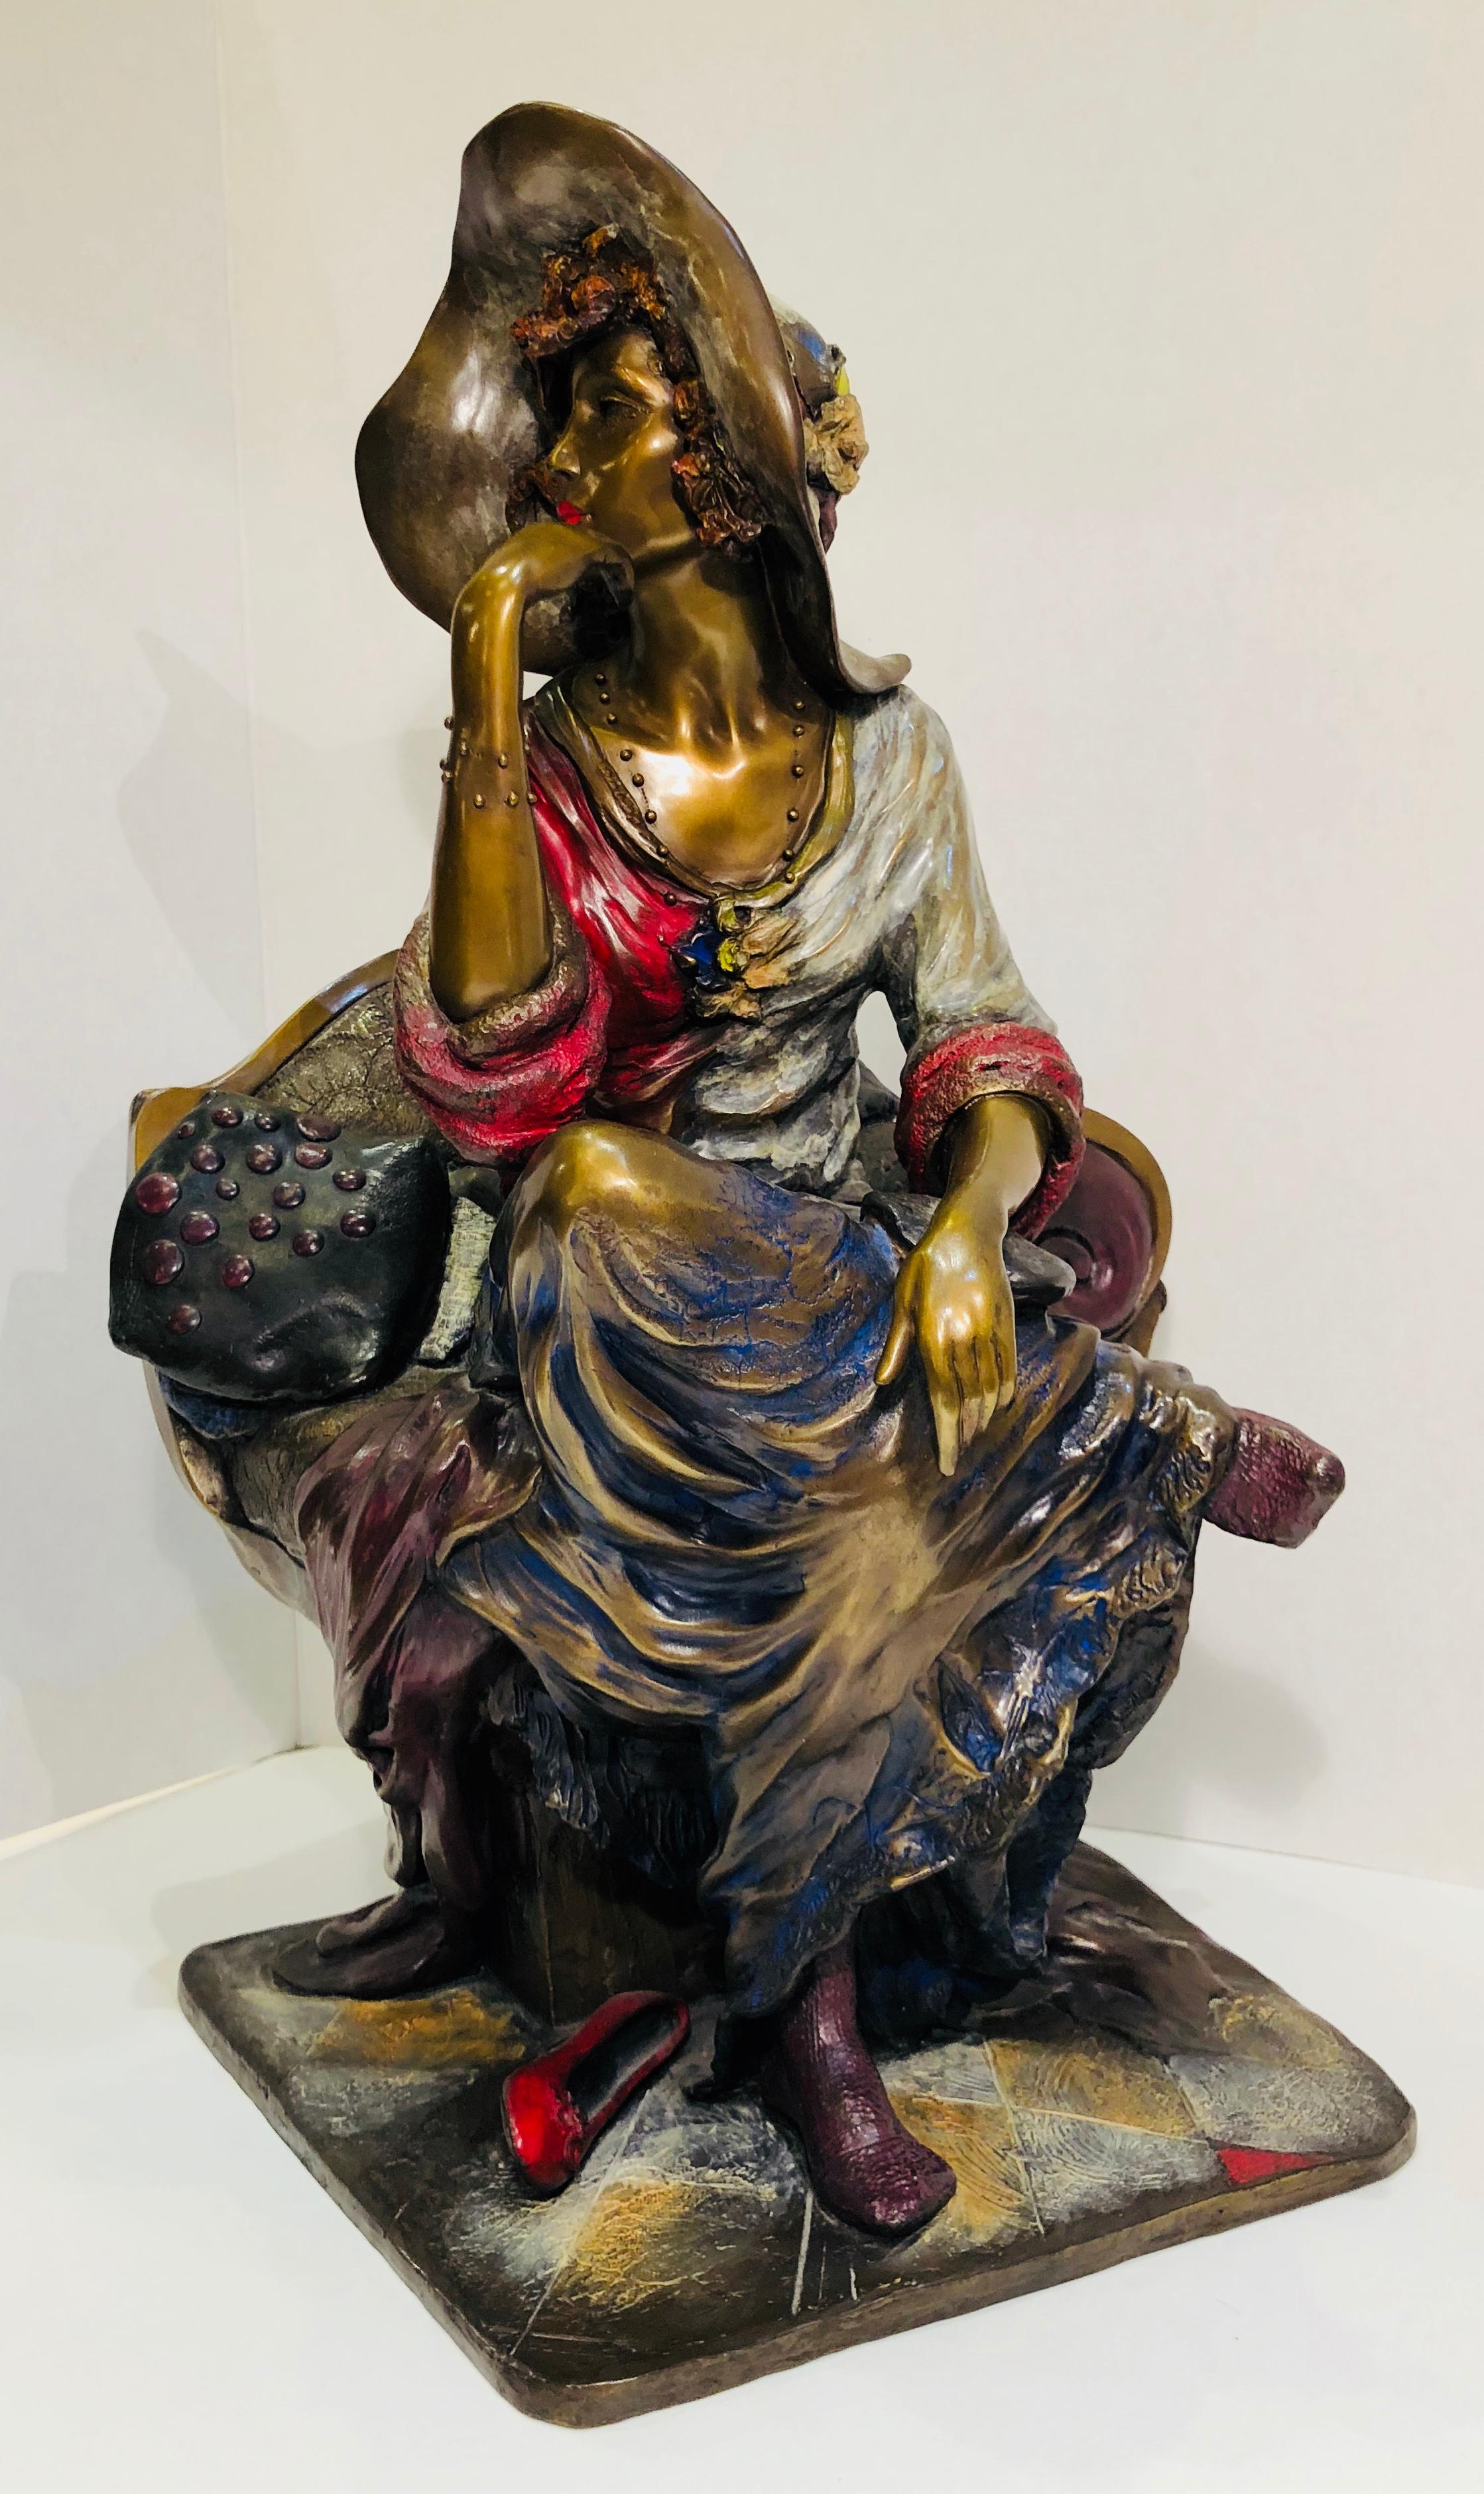 Beautifully detailed, colorful cast bronze sculpture of a seated woman in a large hat and long, flowing skirt, with her shoes kicked off. Her position is alert and thoughtful, yet relaxed, as if she is scanning the crowd for her next dance partner.